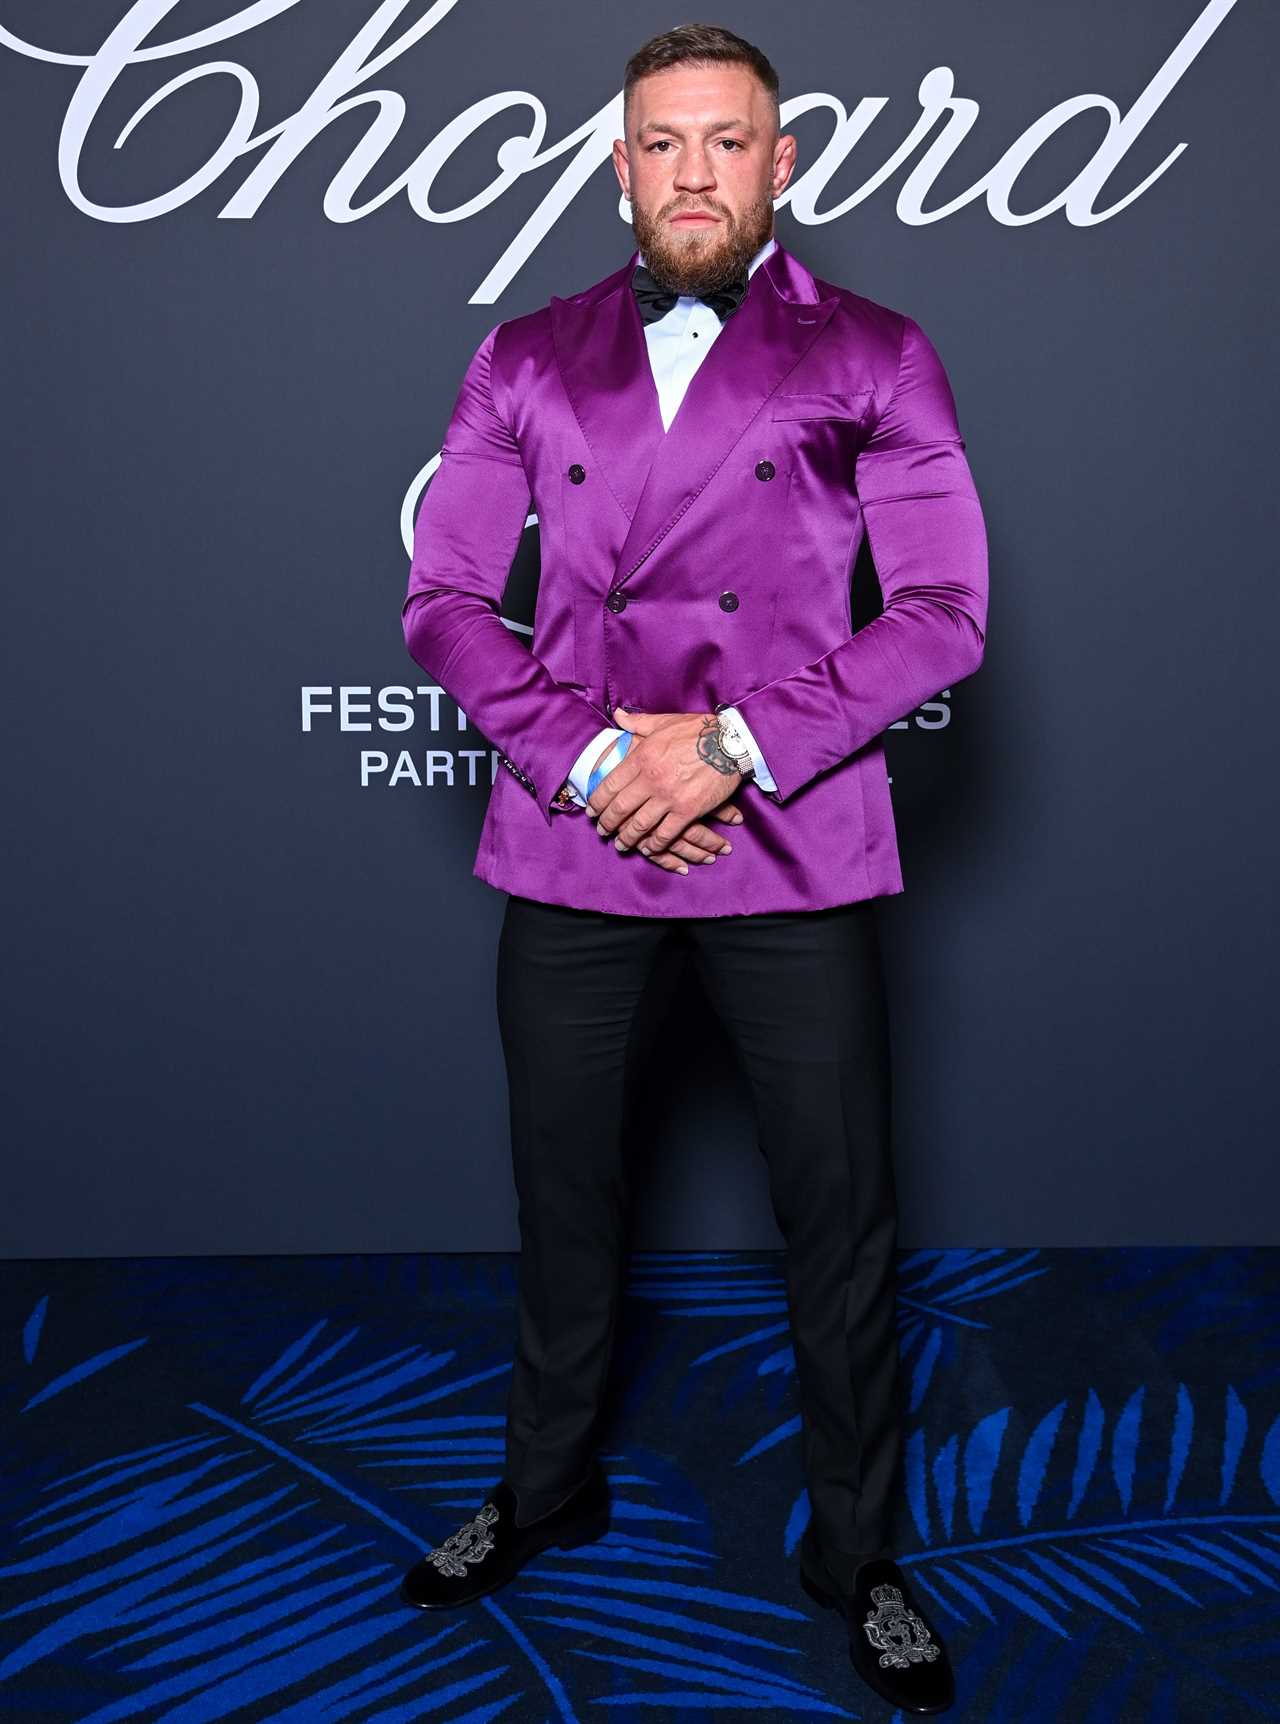 Conor McGregor, UFC star, looks enormous in a daring purple satin costume as he heads to Cannes Film Festival with Dee